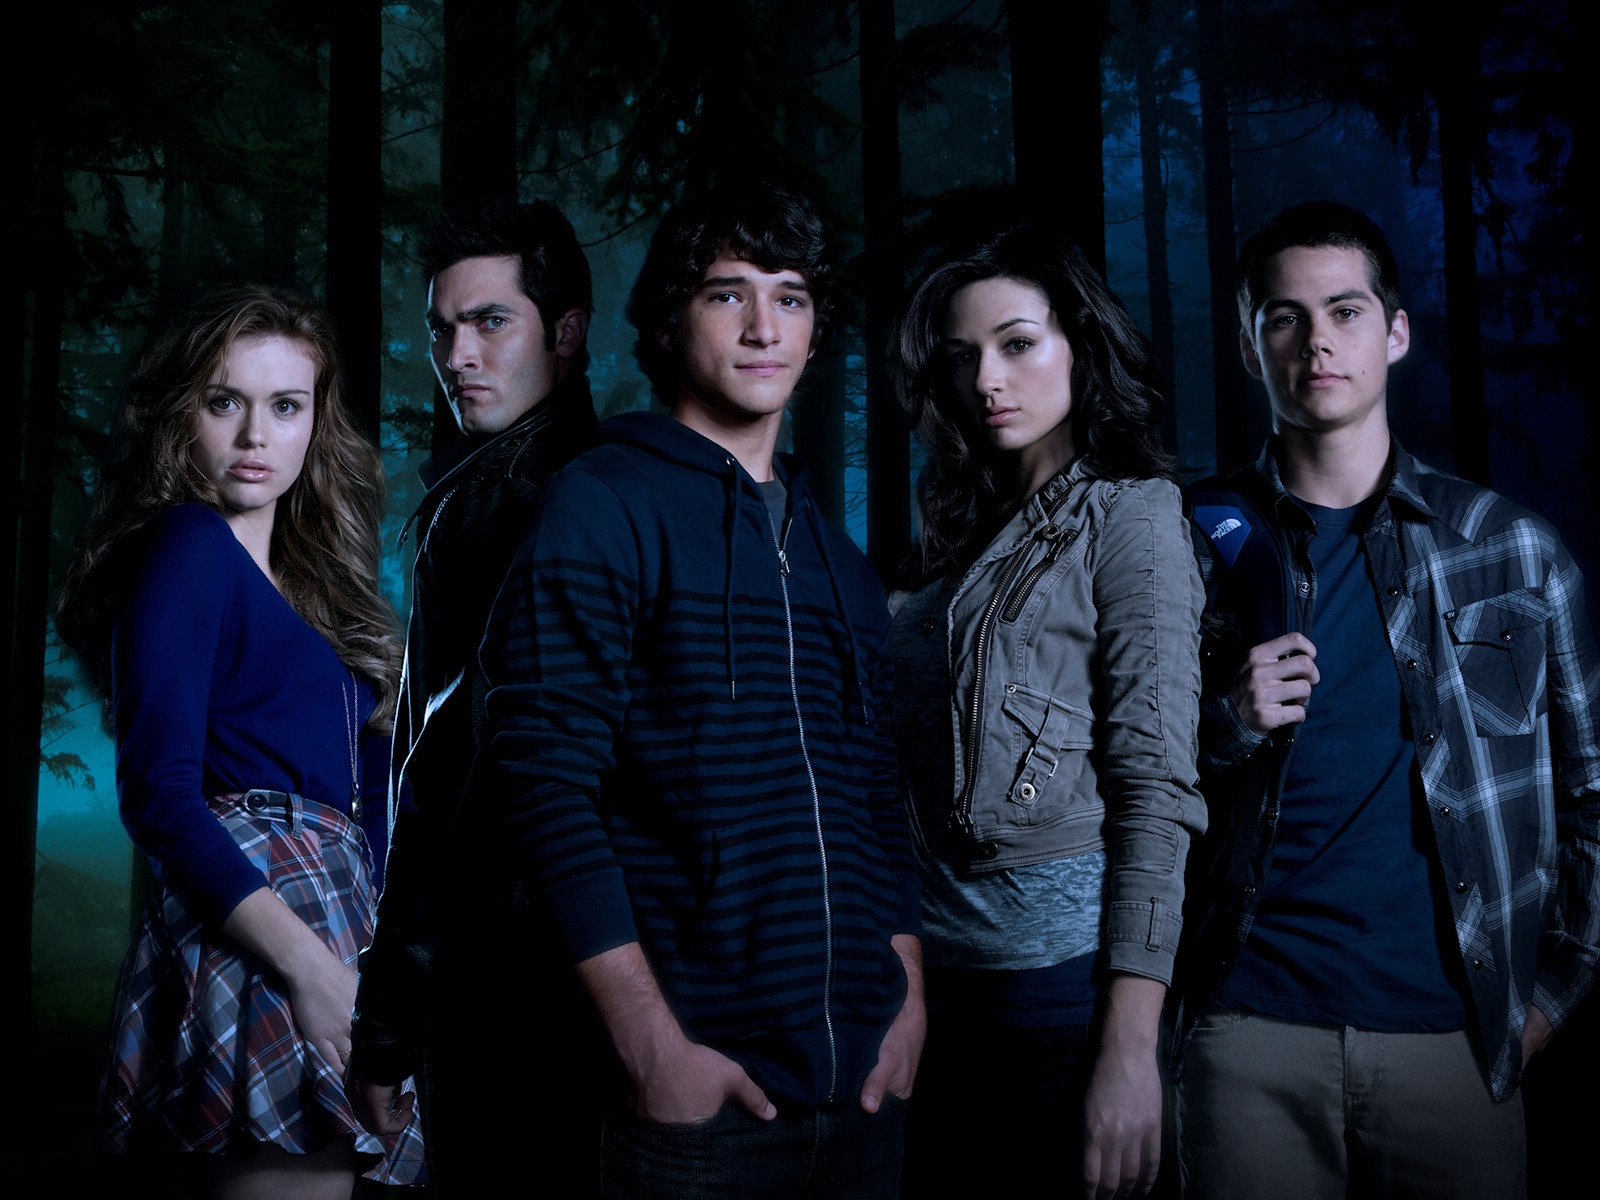 Teen Wolf Cast for 1600 x 1200 resolution